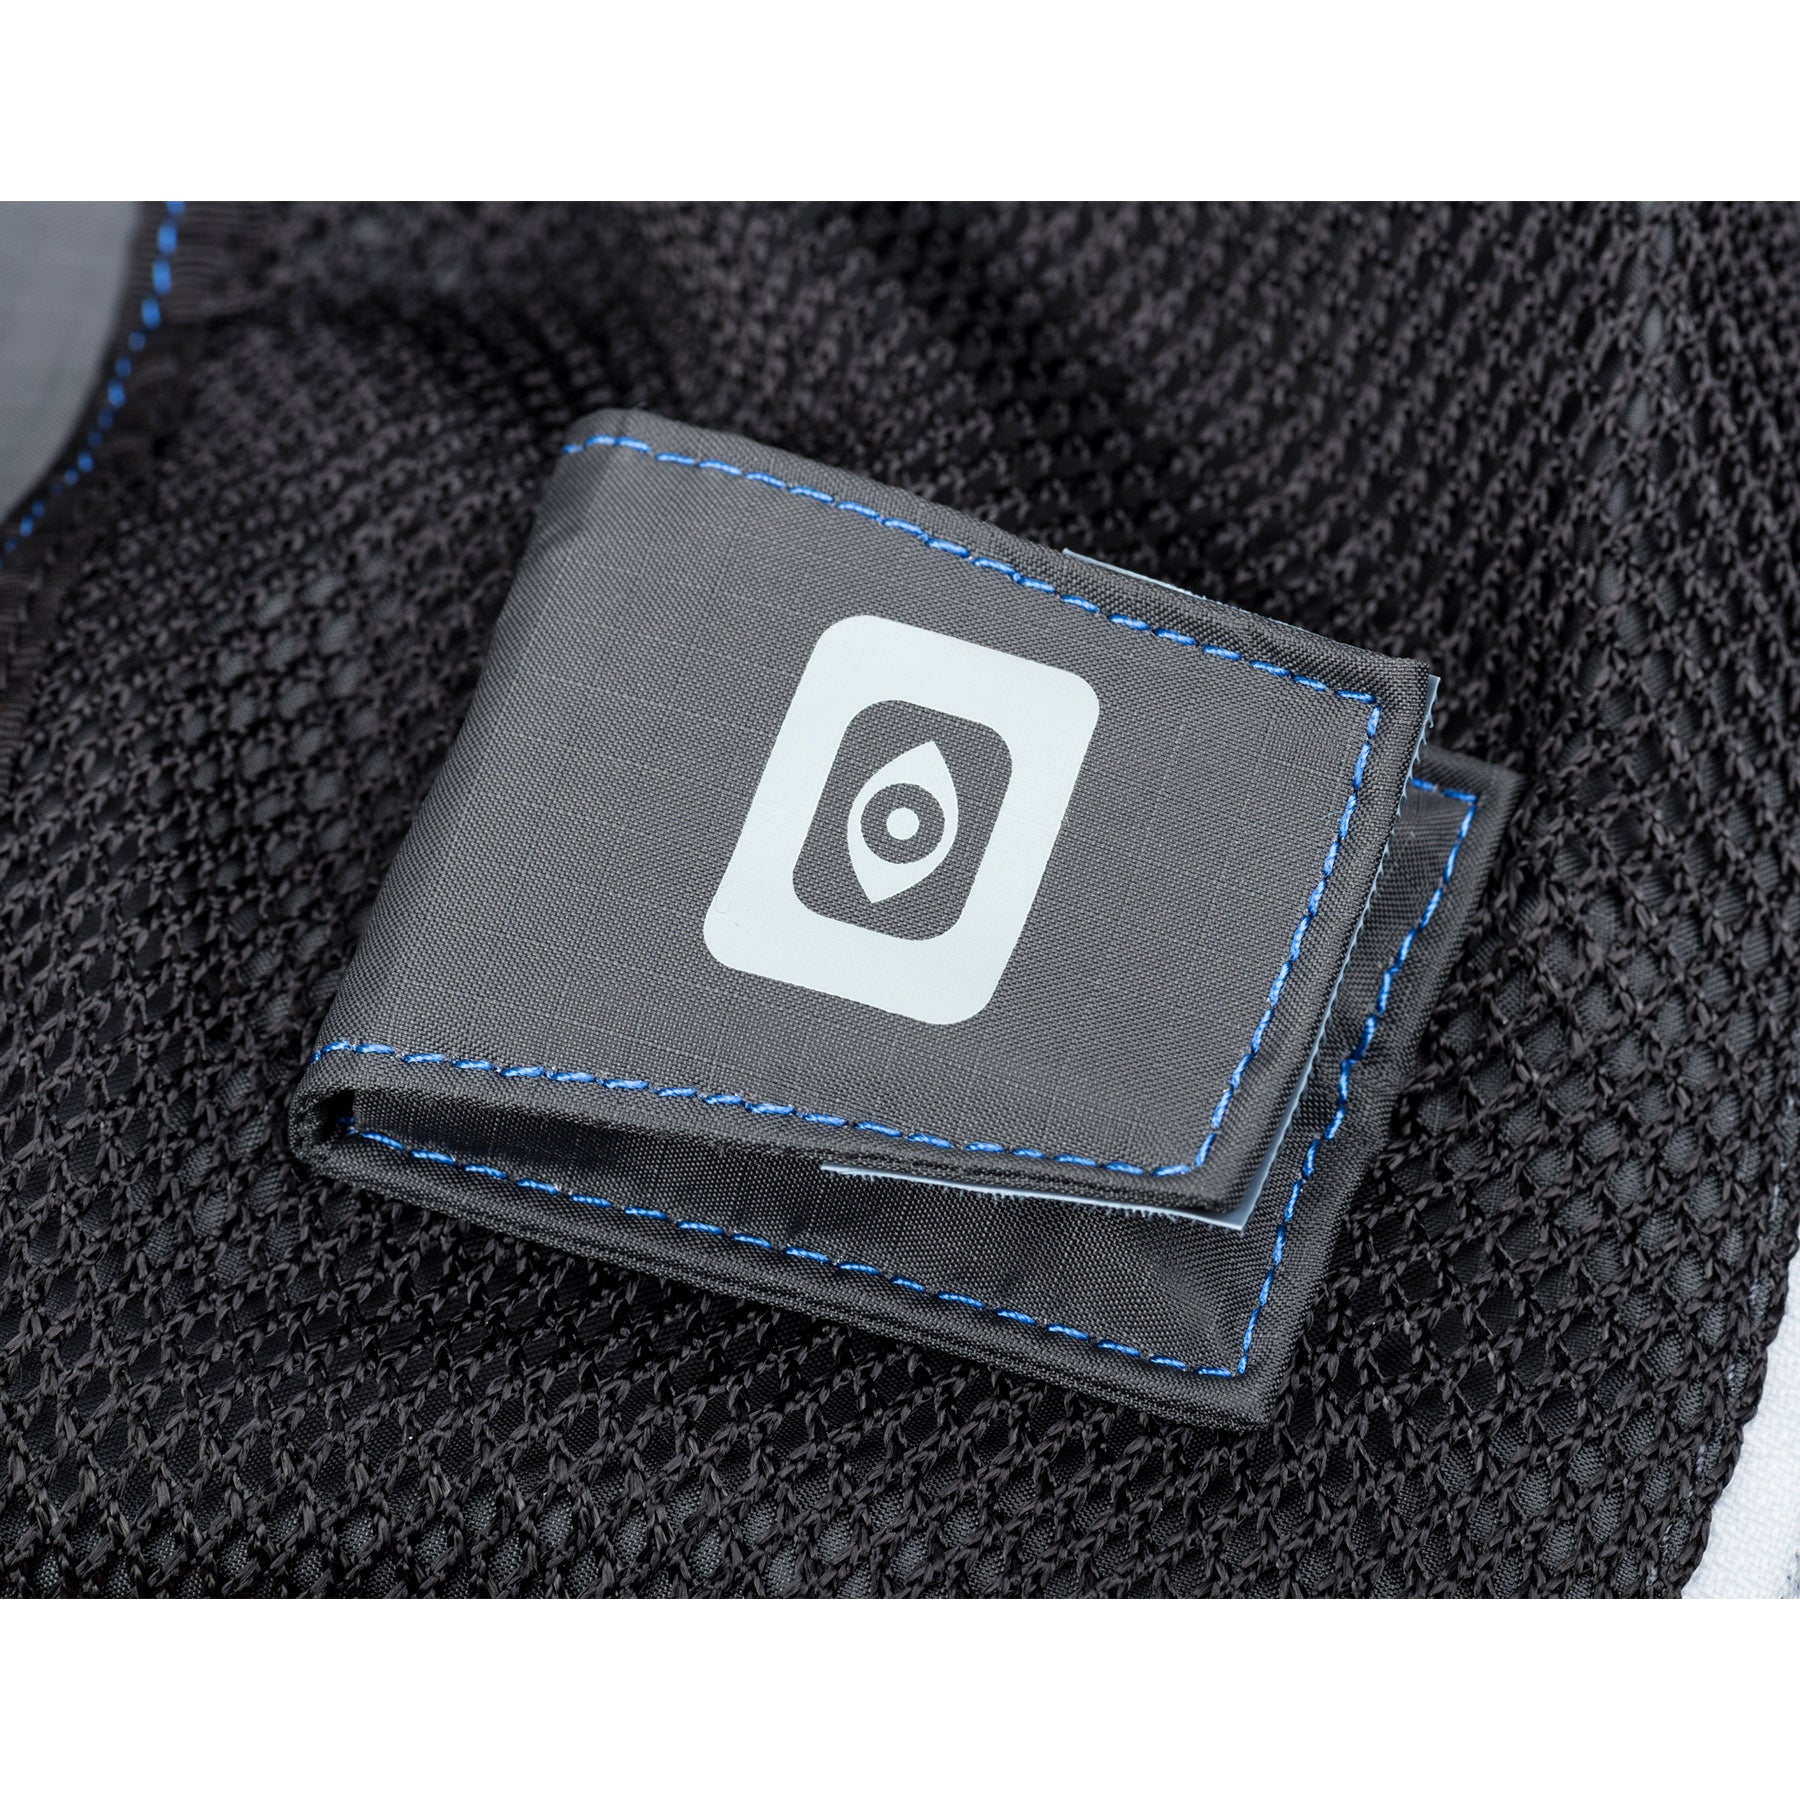 An eyepiece pocket is built into the bottom of the Hydrophobia rain cover (eyepiece sold separately)